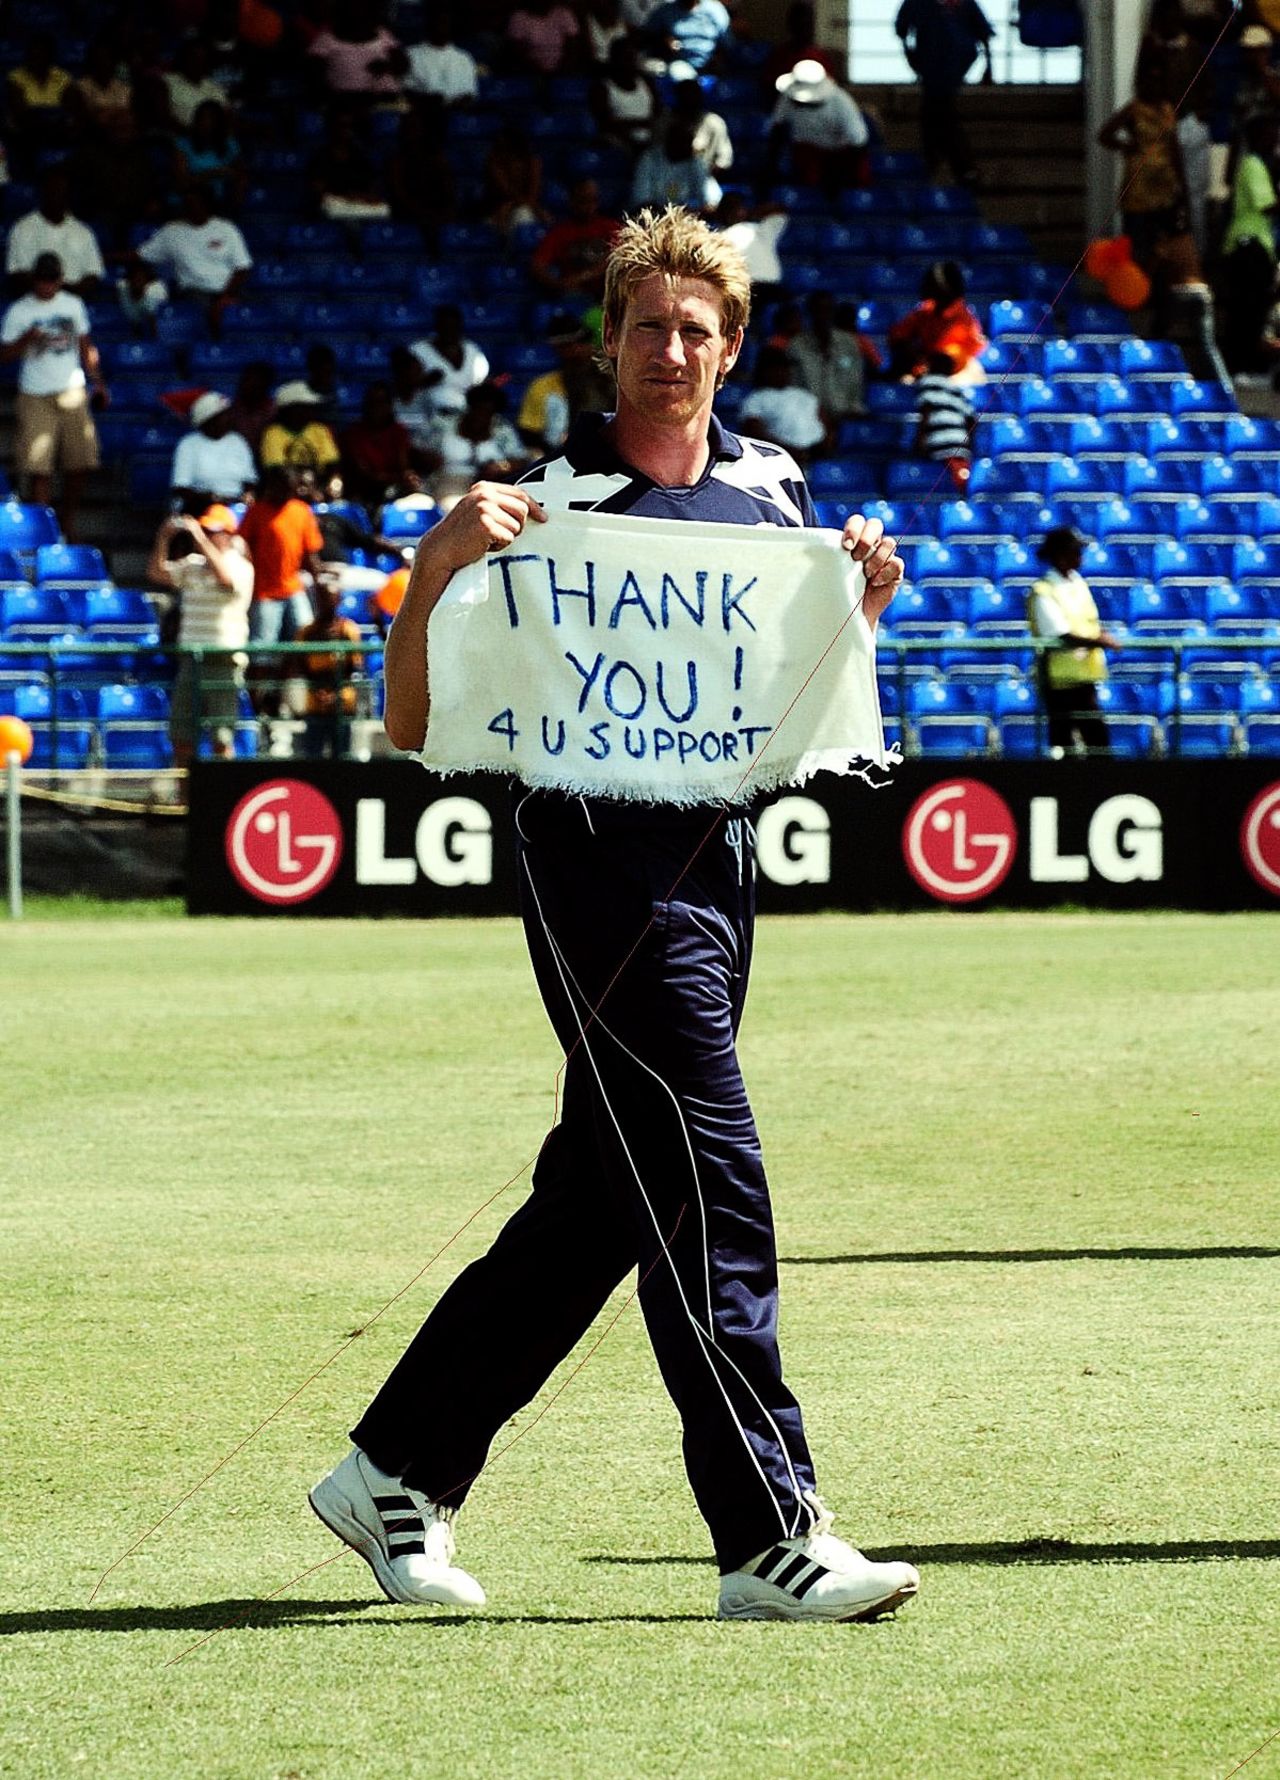 John Blain holds up a sign for Scotland supporters at the end of the team's defeat to Netherlands in the 2007 World Cup, Netherlands v Scotland, Group A, St Kitts, March 22, 2007